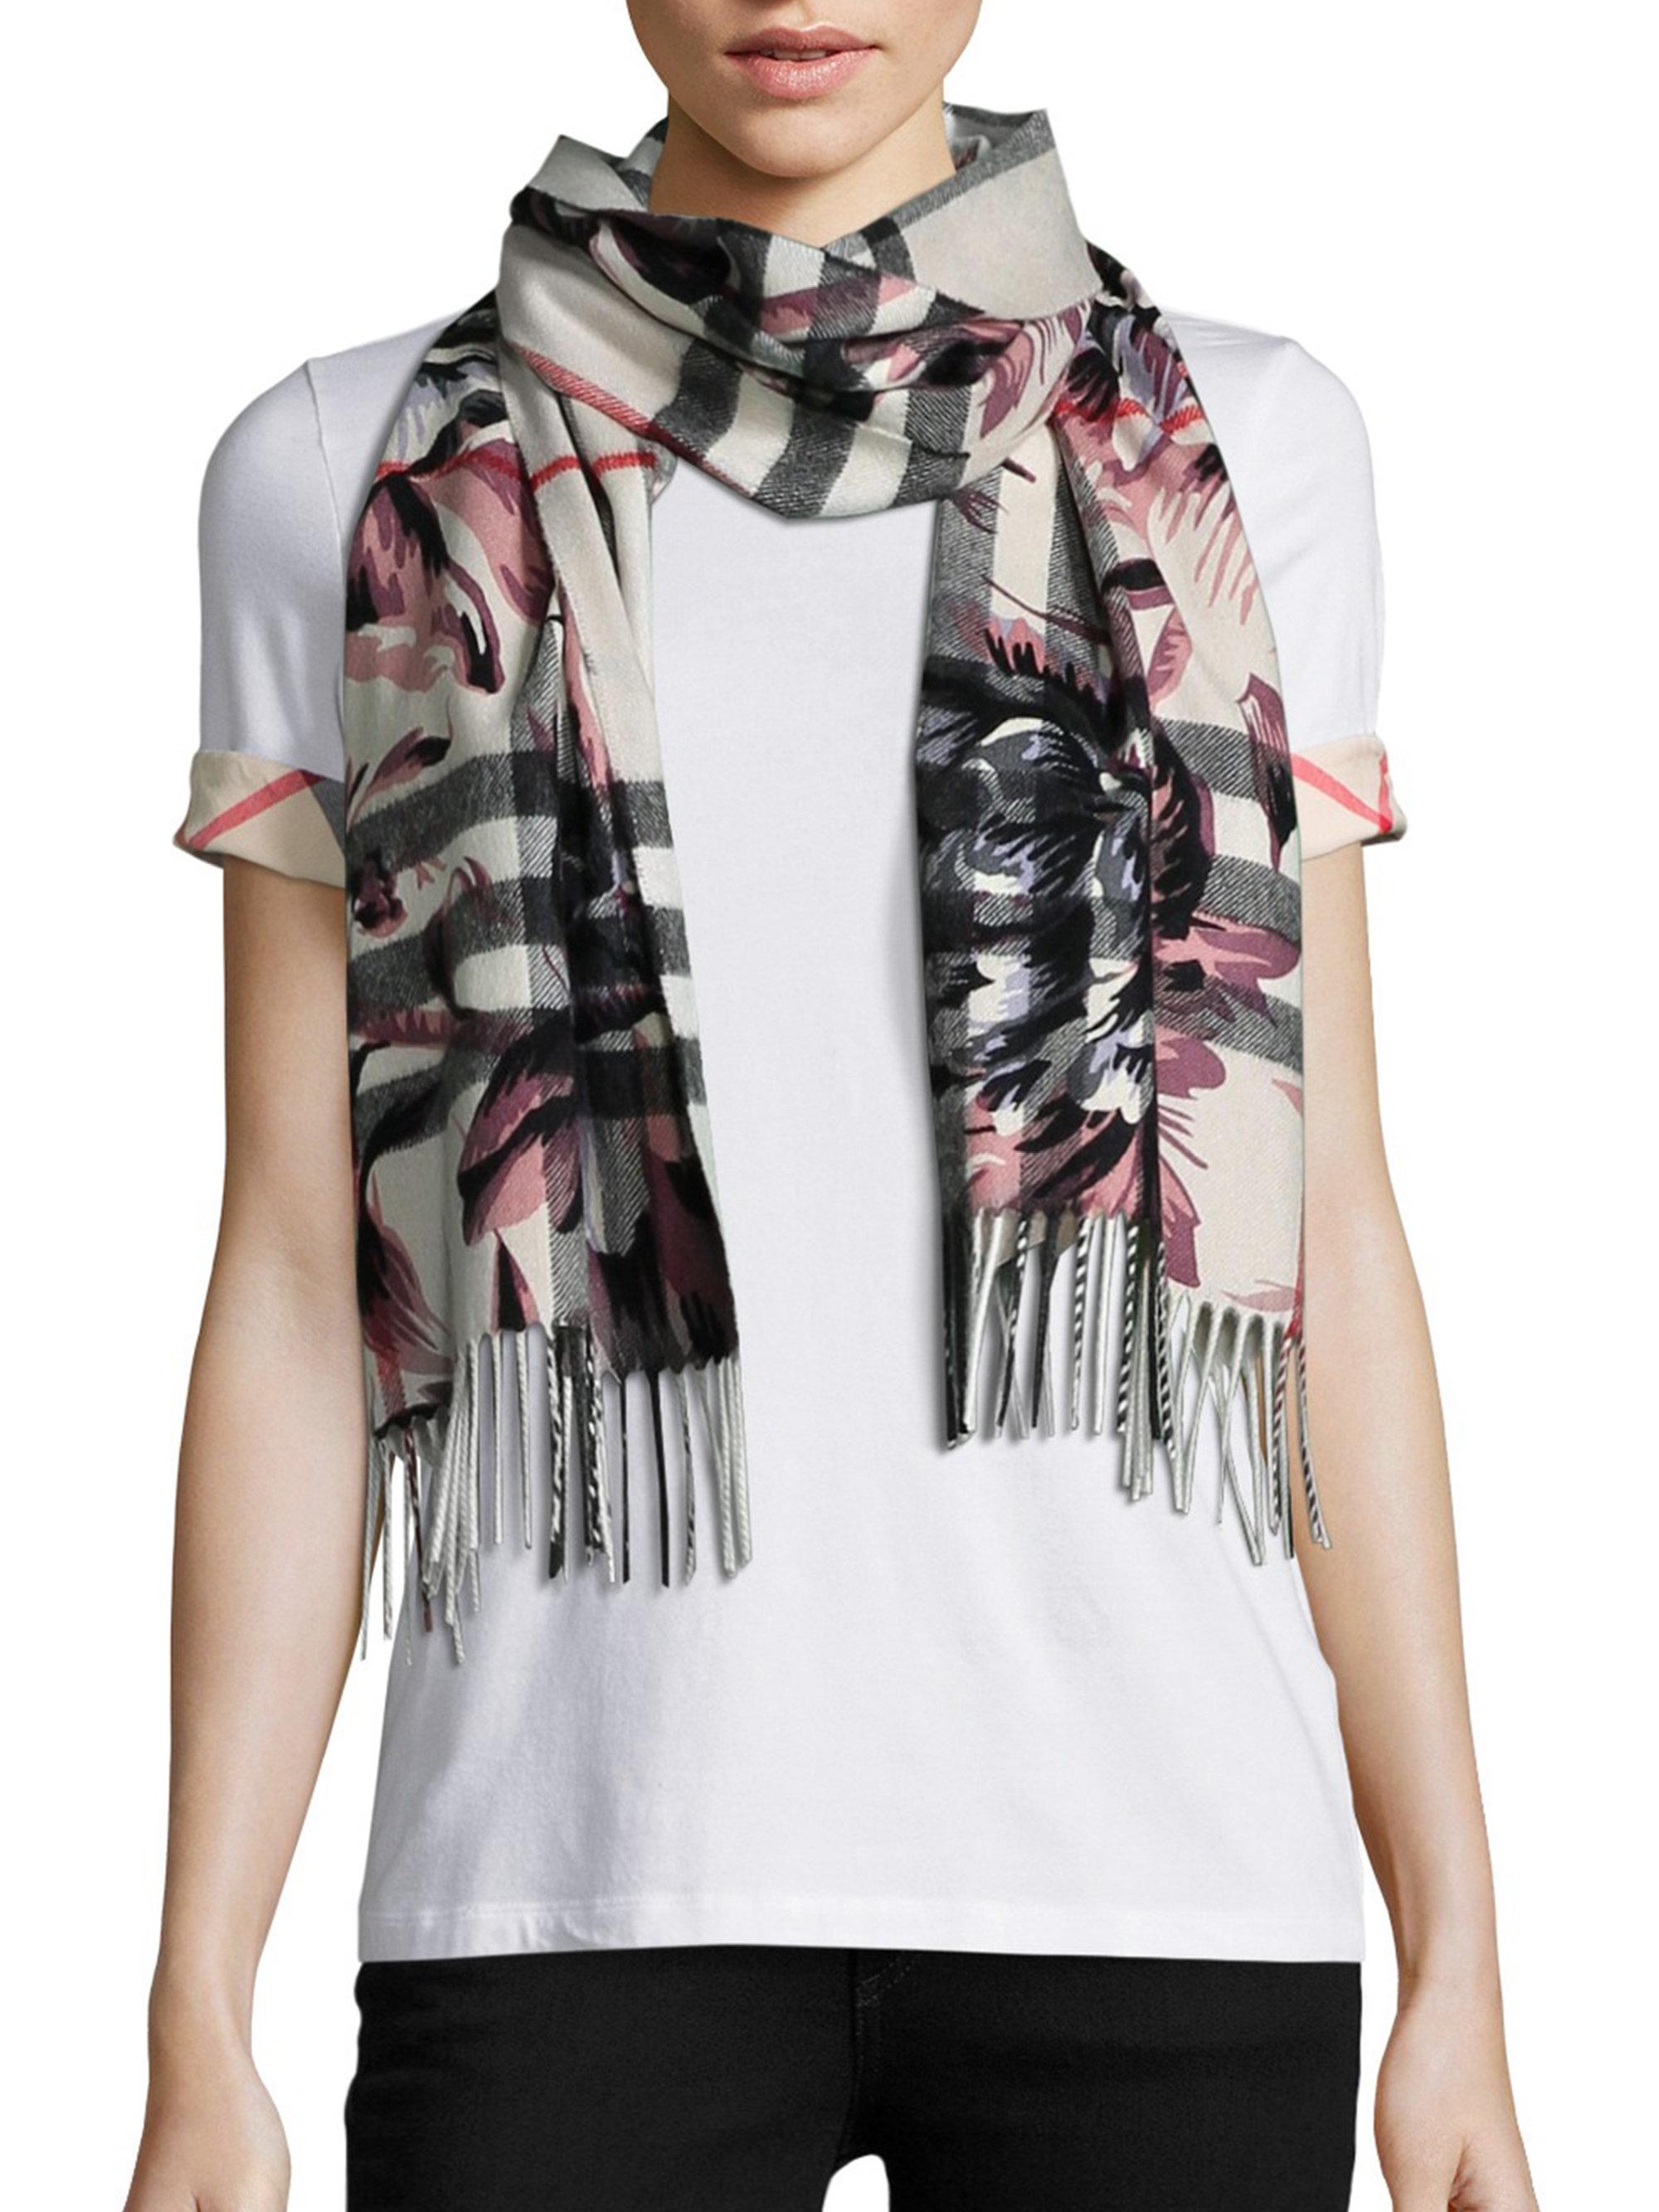 burberry scarf rose Online Shopping for Women, Men, Kids Fashion &  Lifestyle|Free Delivery & Returns! -